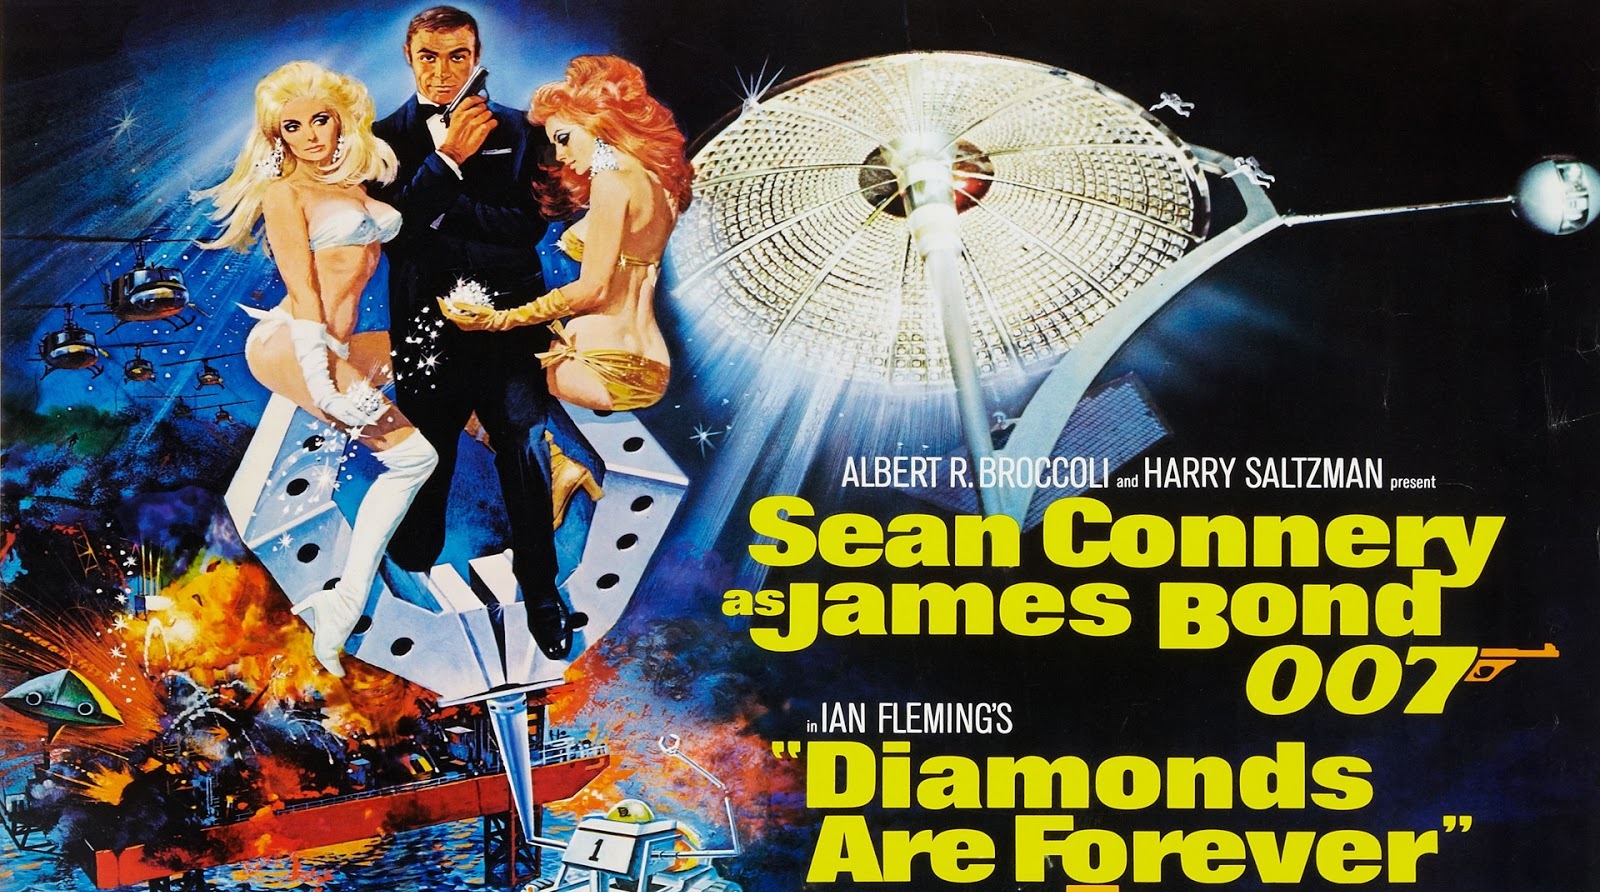 35 Facts about the movie Diamonds Are Forever - Facts.net